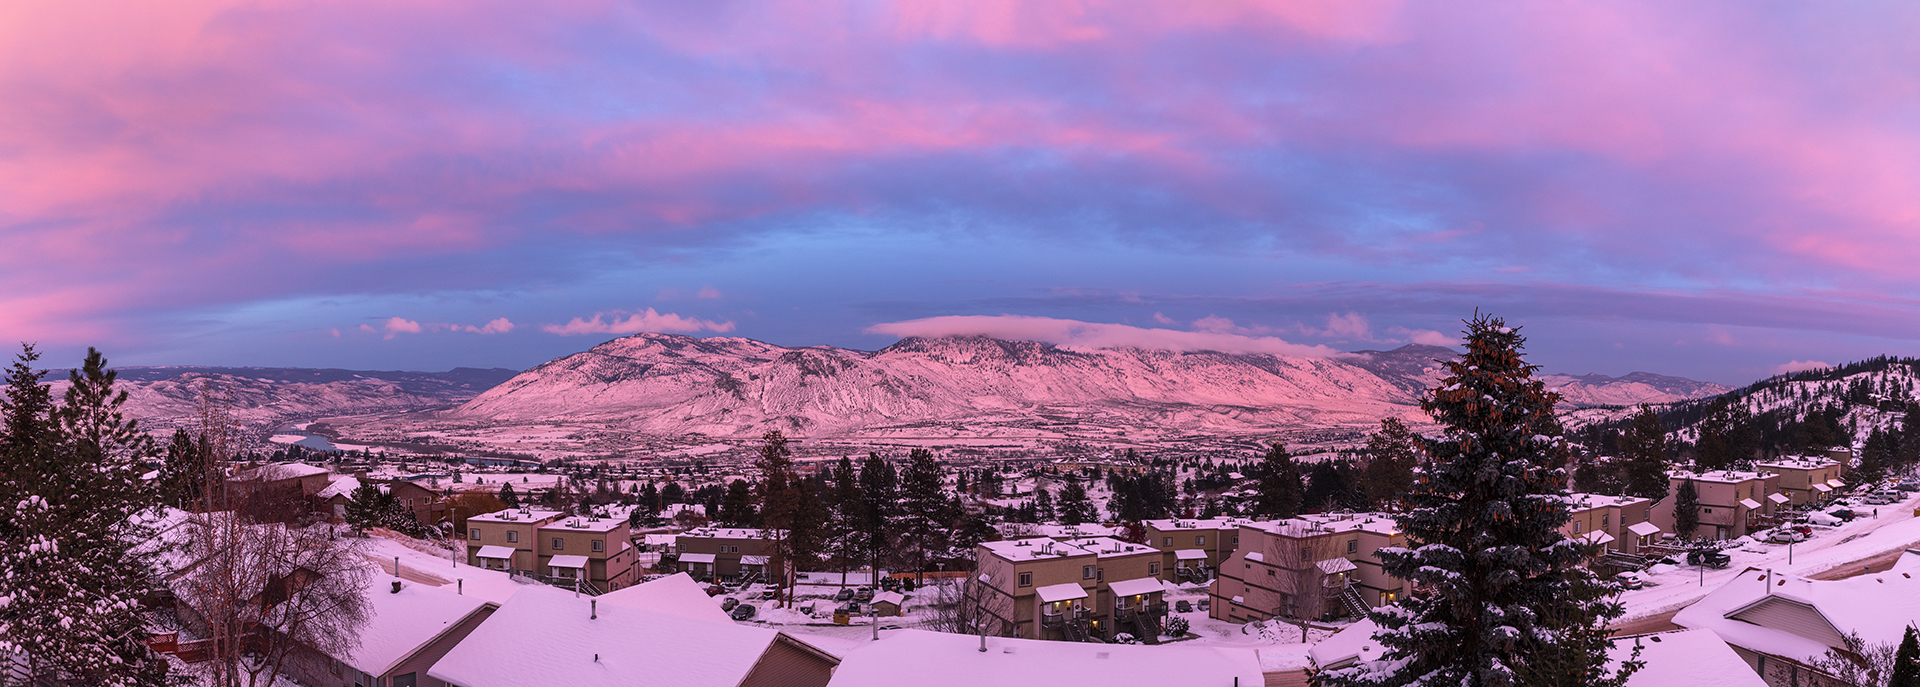 snowy city with trees and mountain with blue and pink clouds